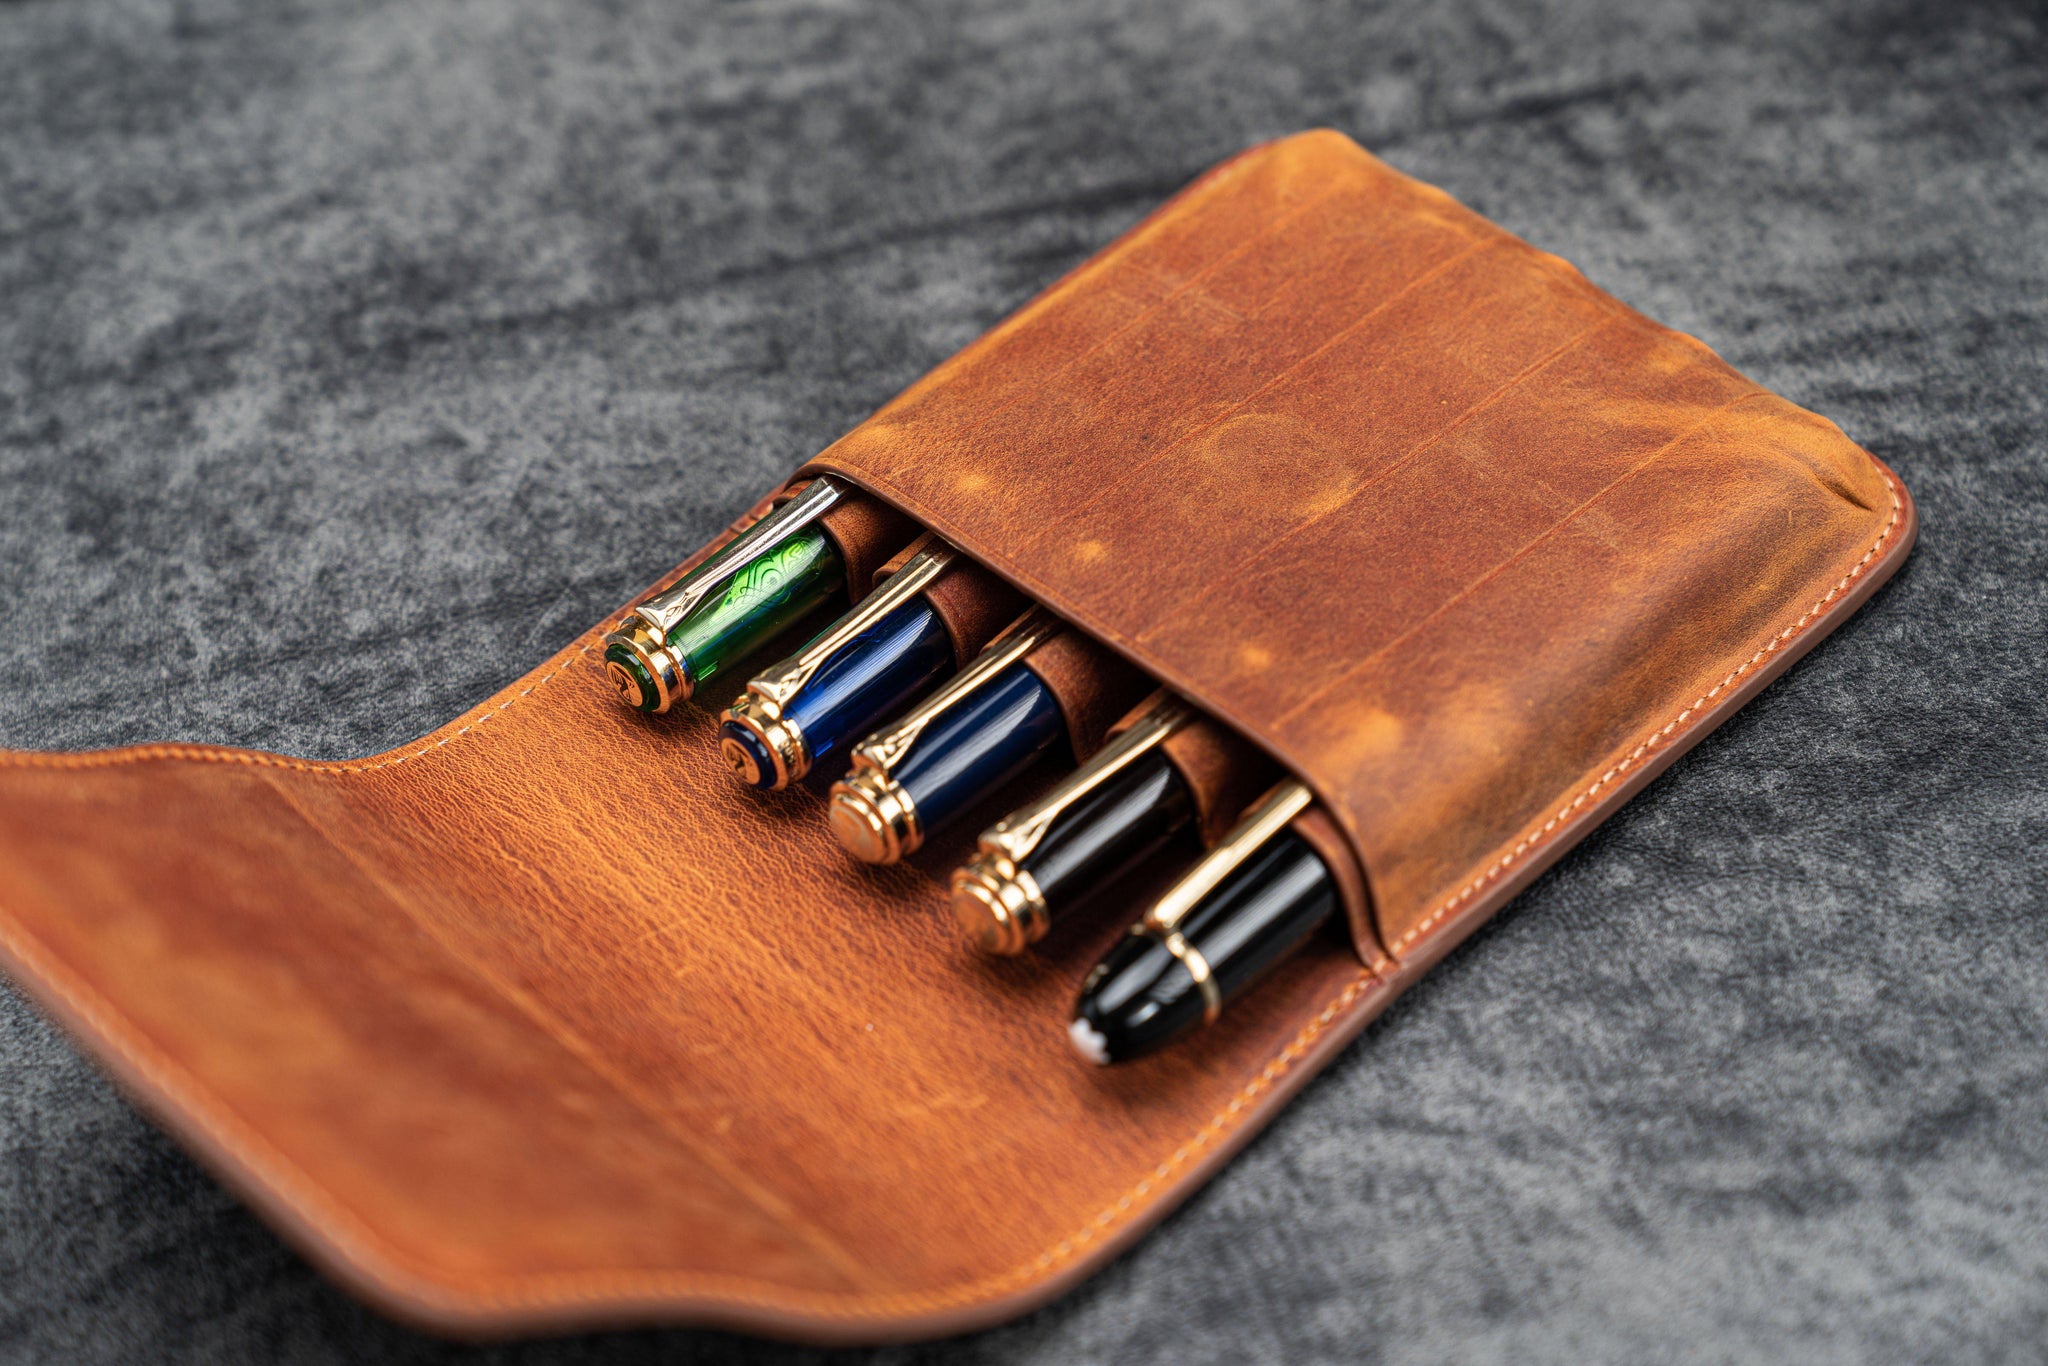 The types of Japanese Pen Cases